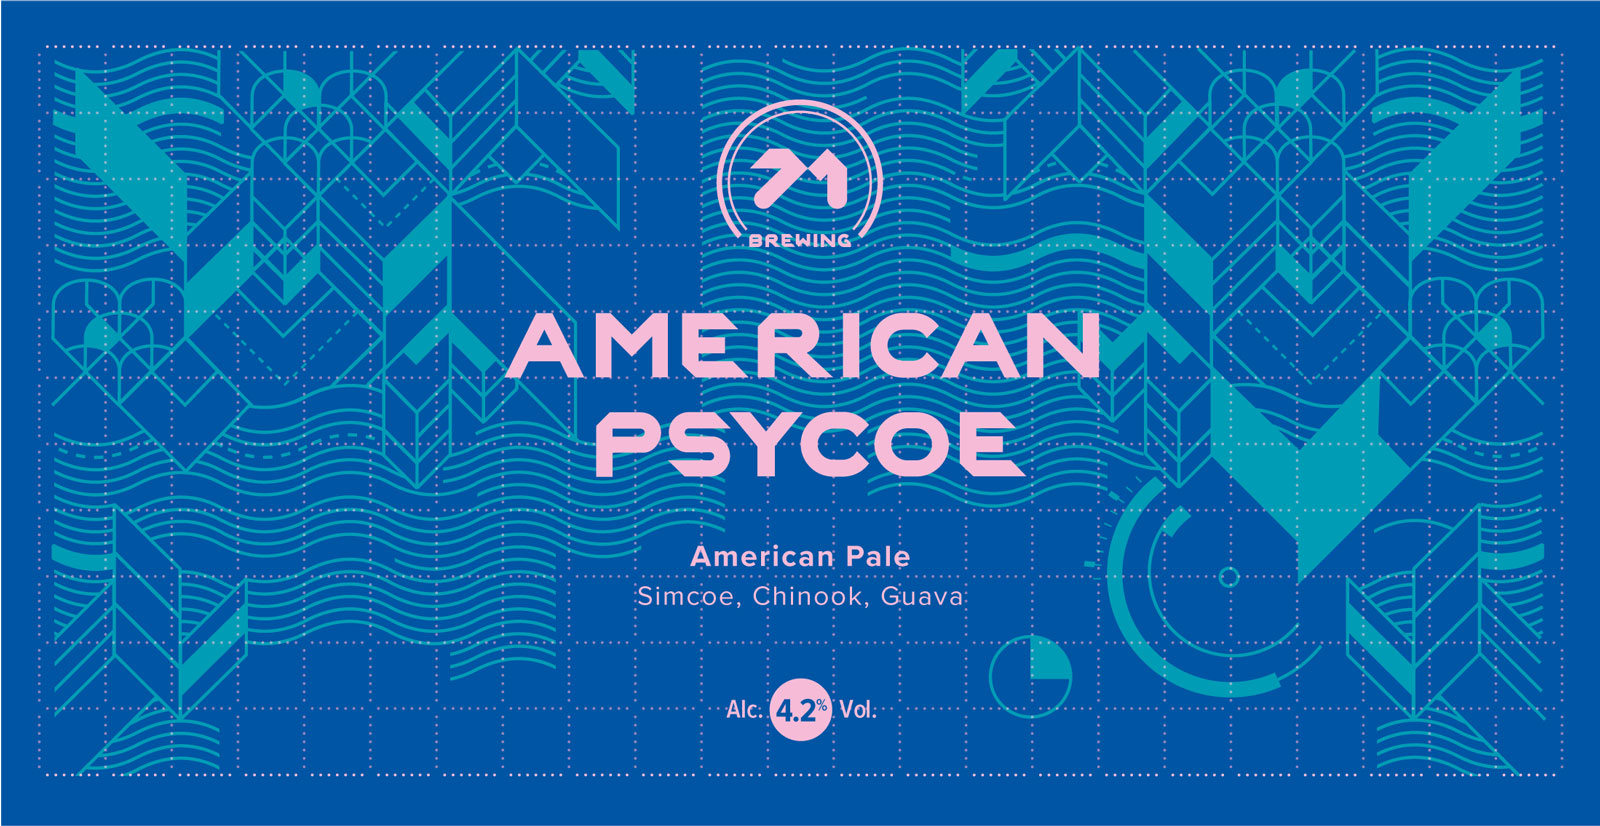 Label for American Psycoe American Pale beer. Pink logo and typography ontop of a pale blue geometric pattern and deeper blue background.